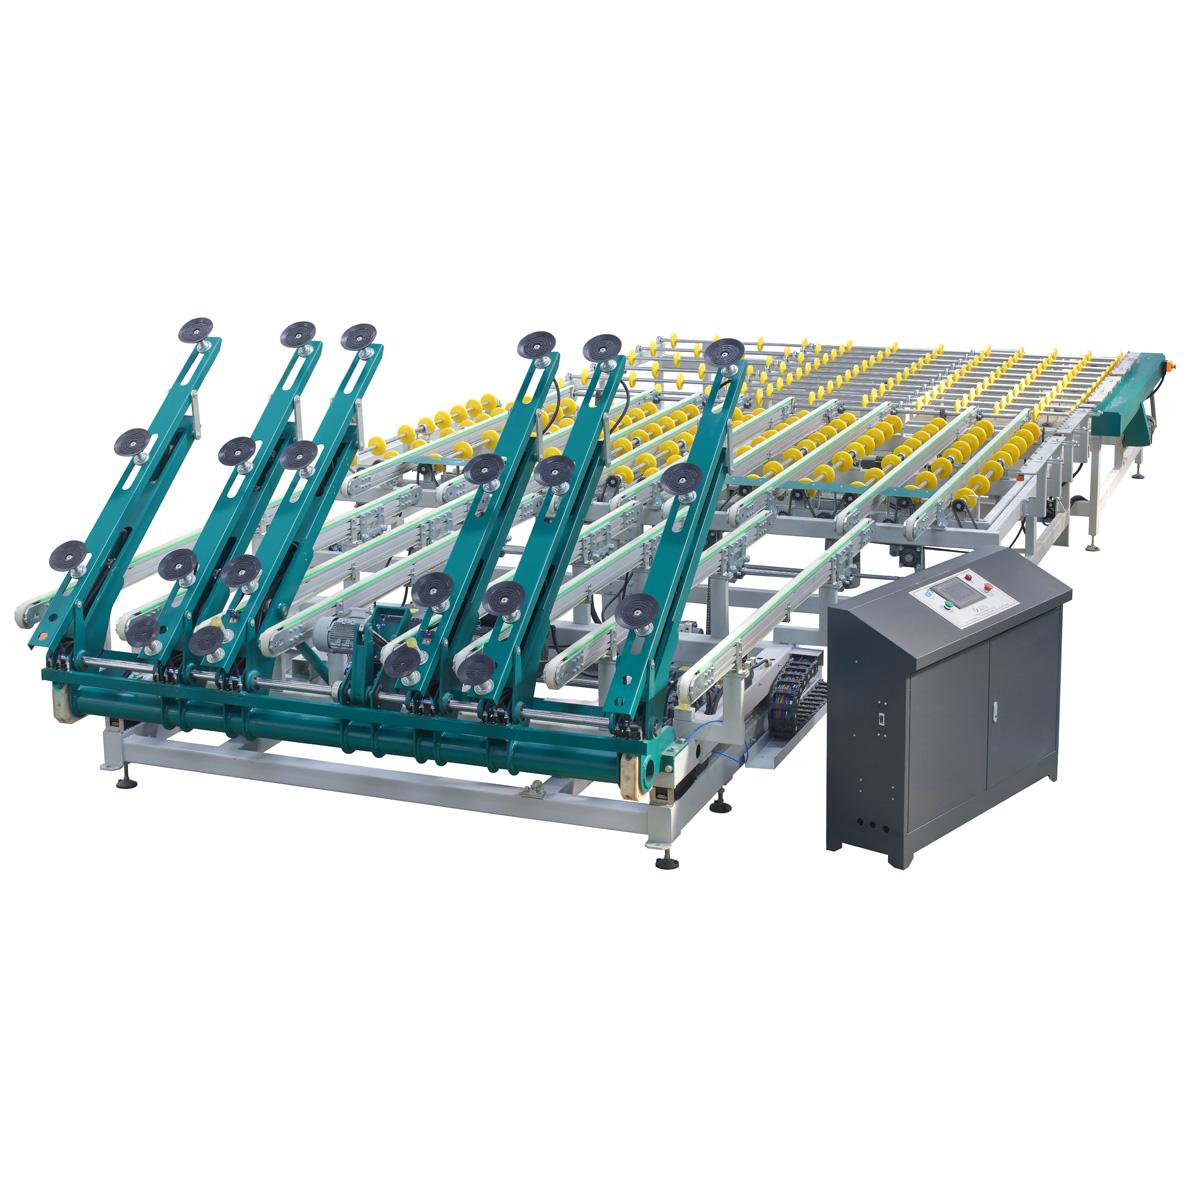 Product Glass loader ST-5030 - Fstechwin image